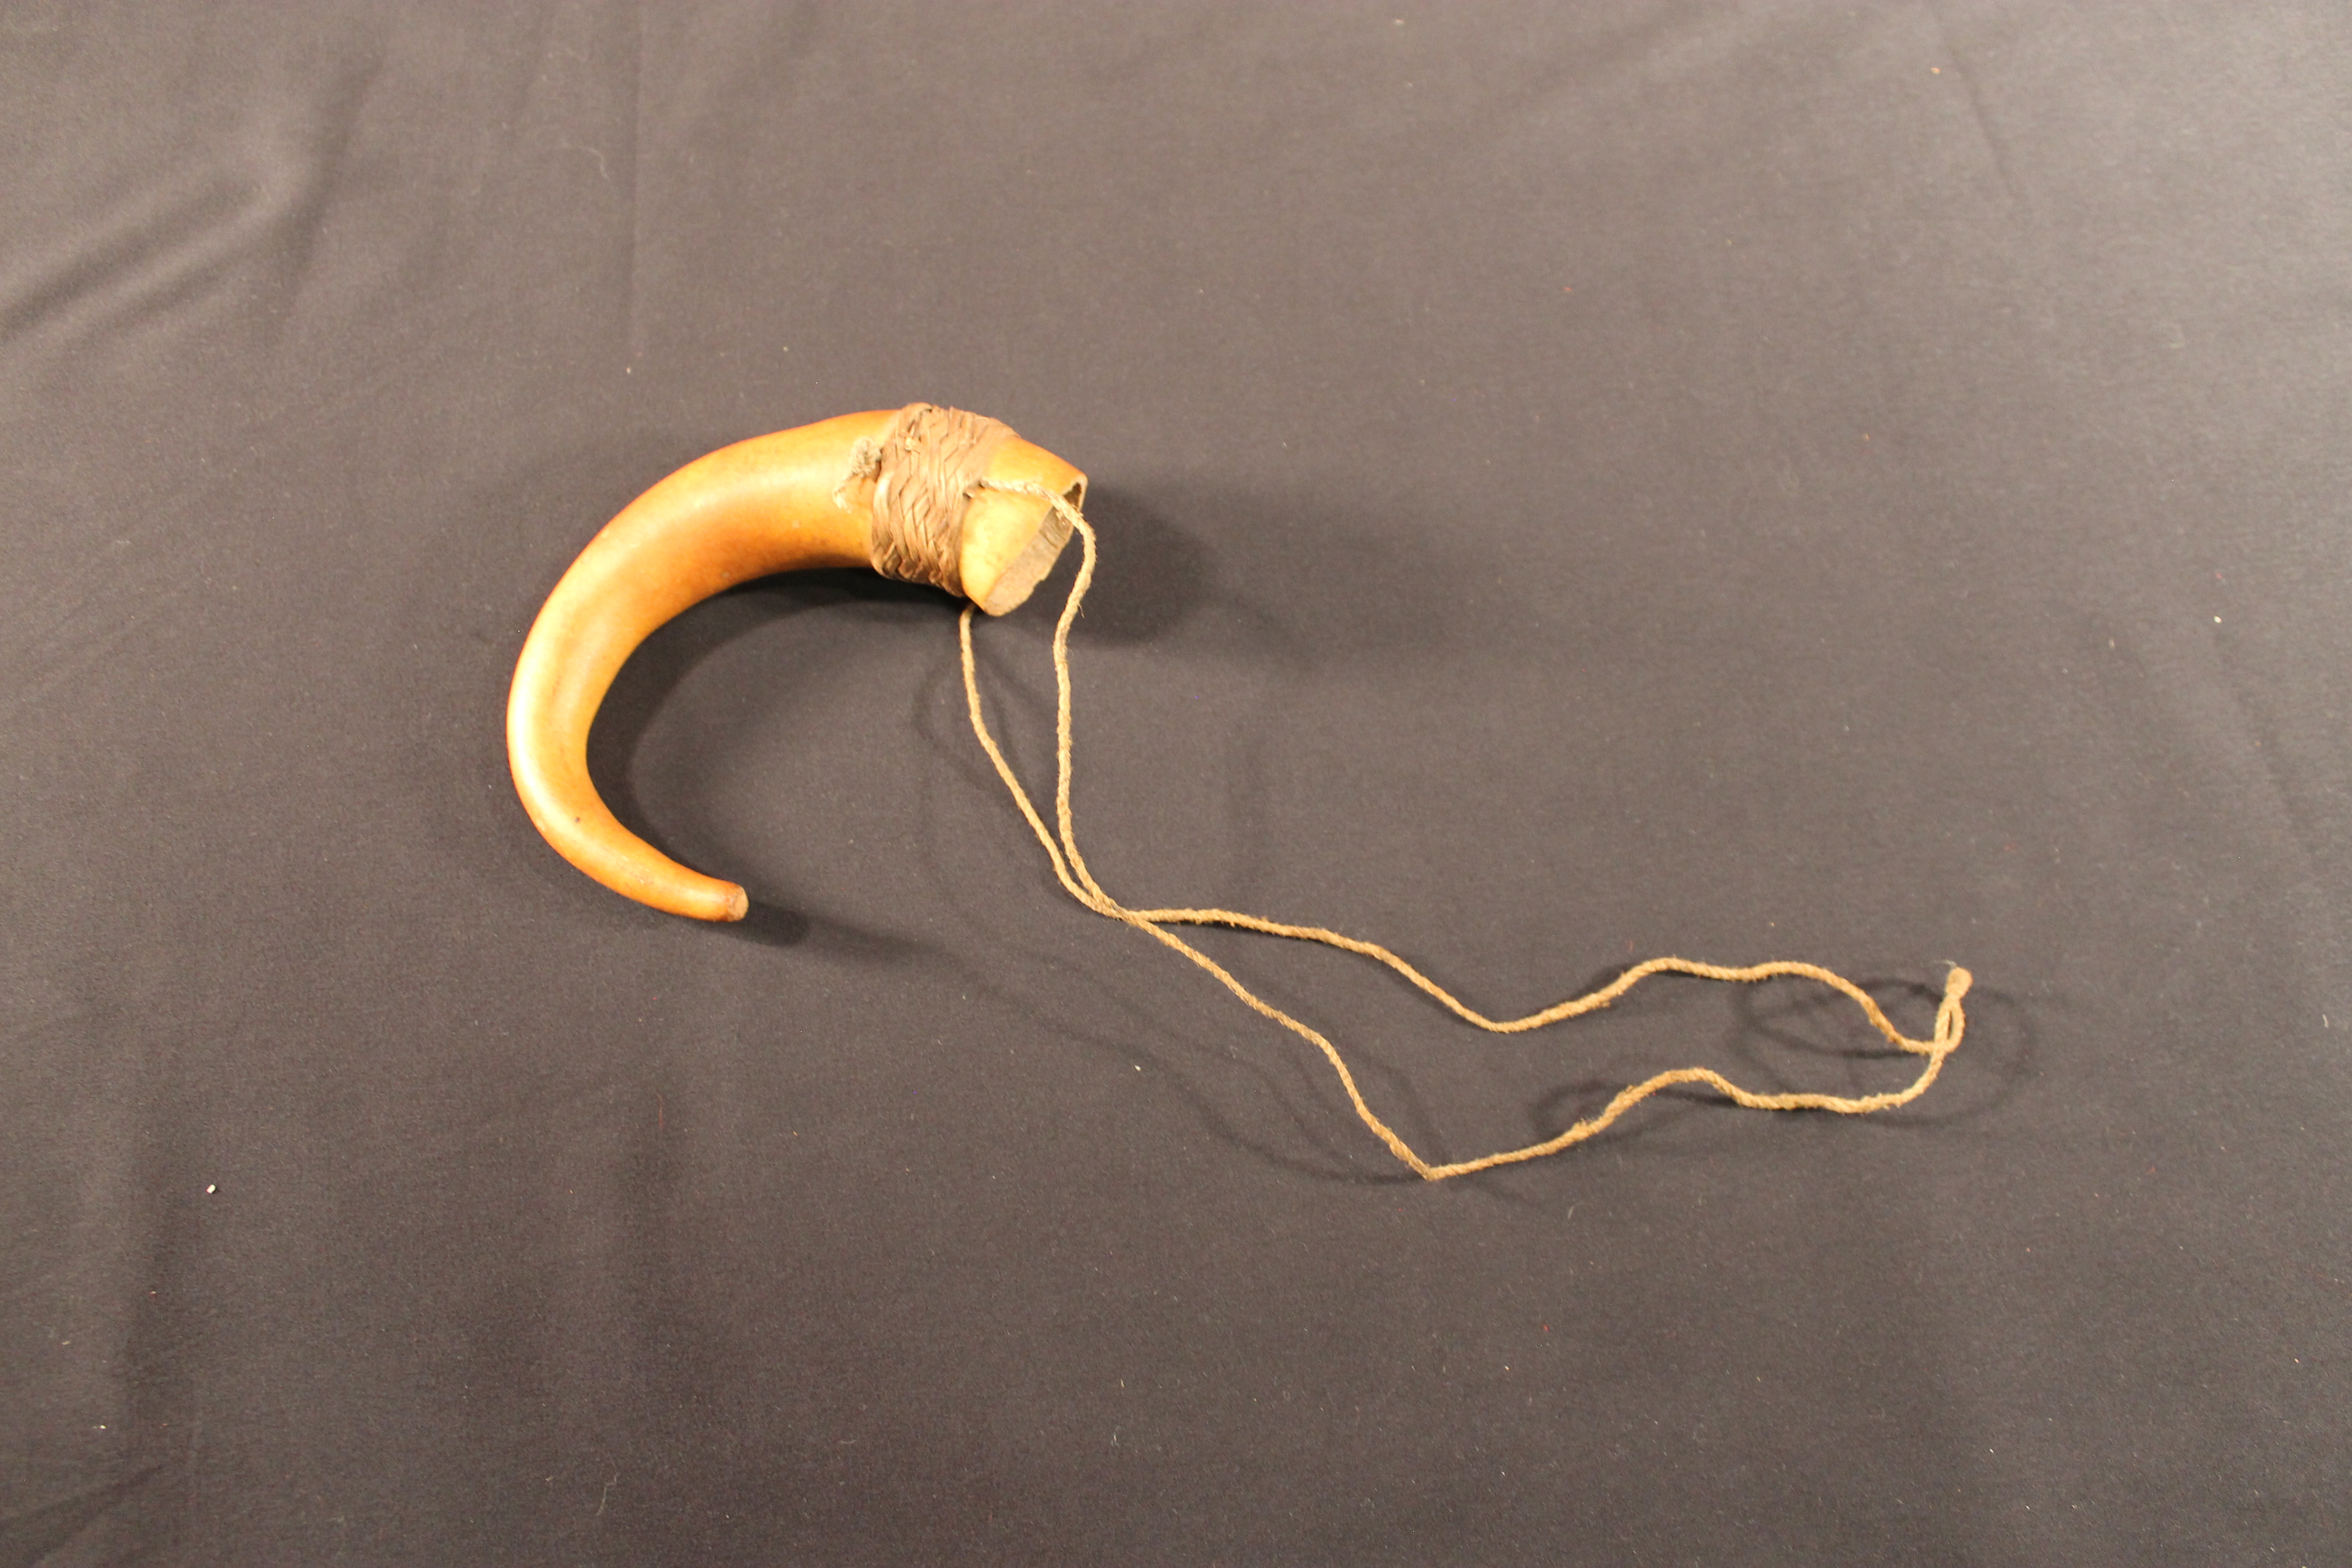 Curved gourd with attached strings.